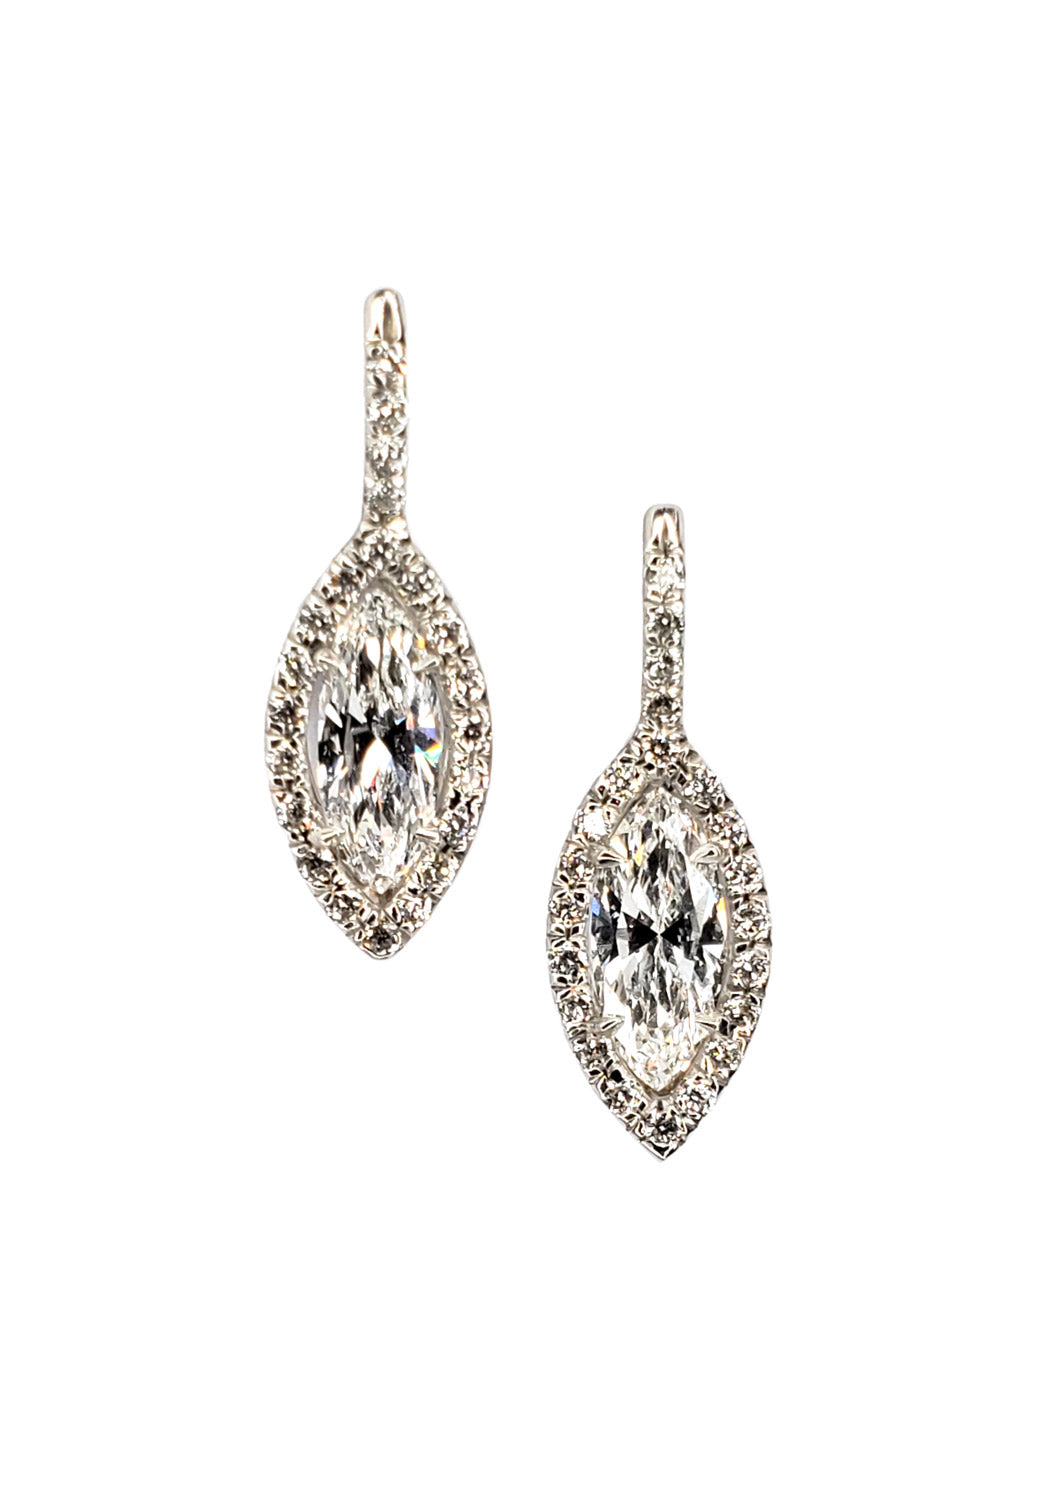 Oster Collection 18K White Gold Marquise Diamond Drop Earrings | OsterJewelers.com